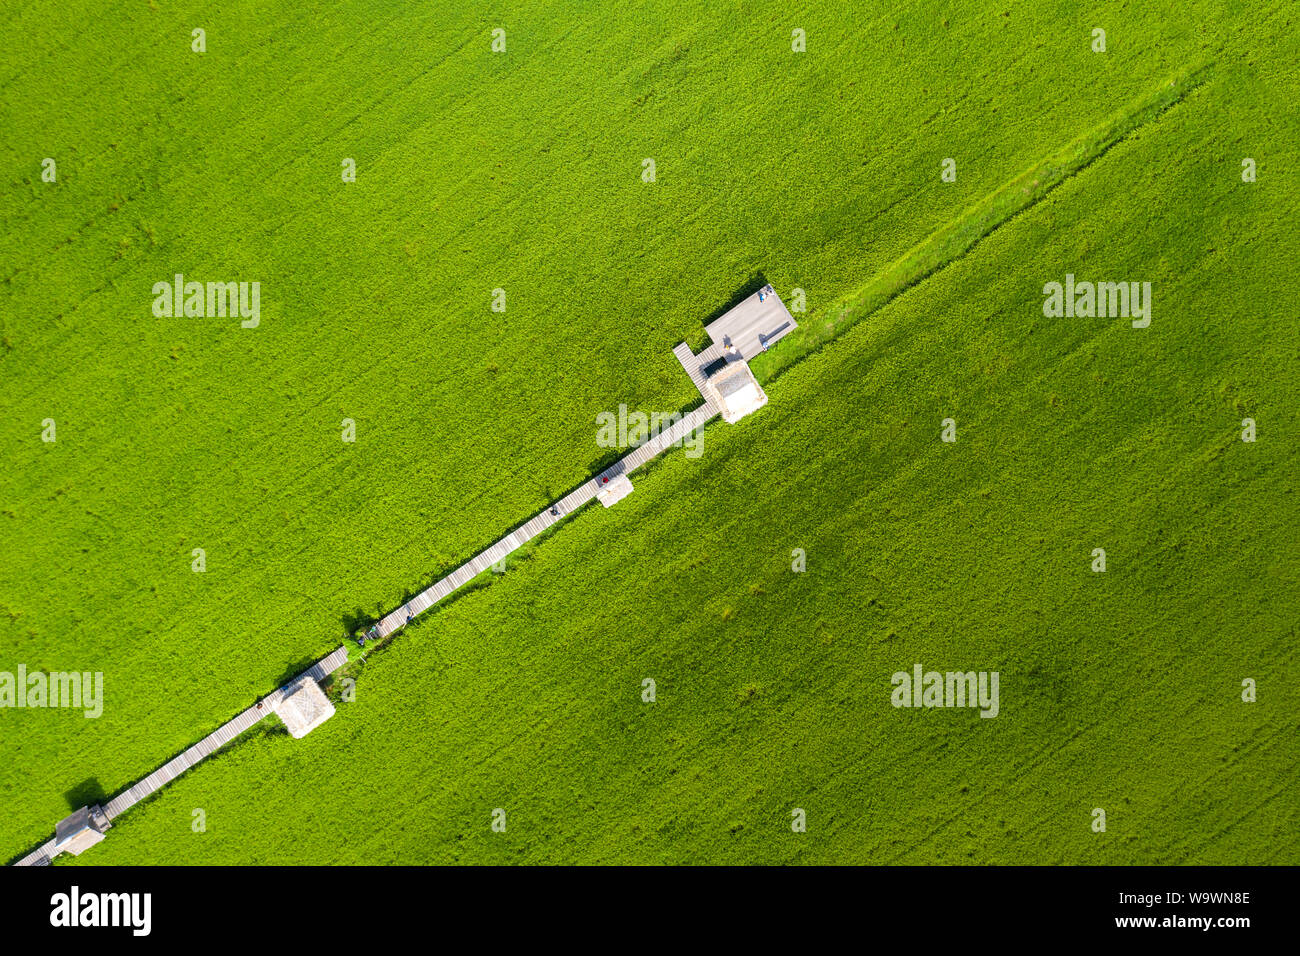 Image of beautiful Terraced rice field in water season and Irrigation from drone,Top view of rices paddy field with wooden bridge. Stock Photo